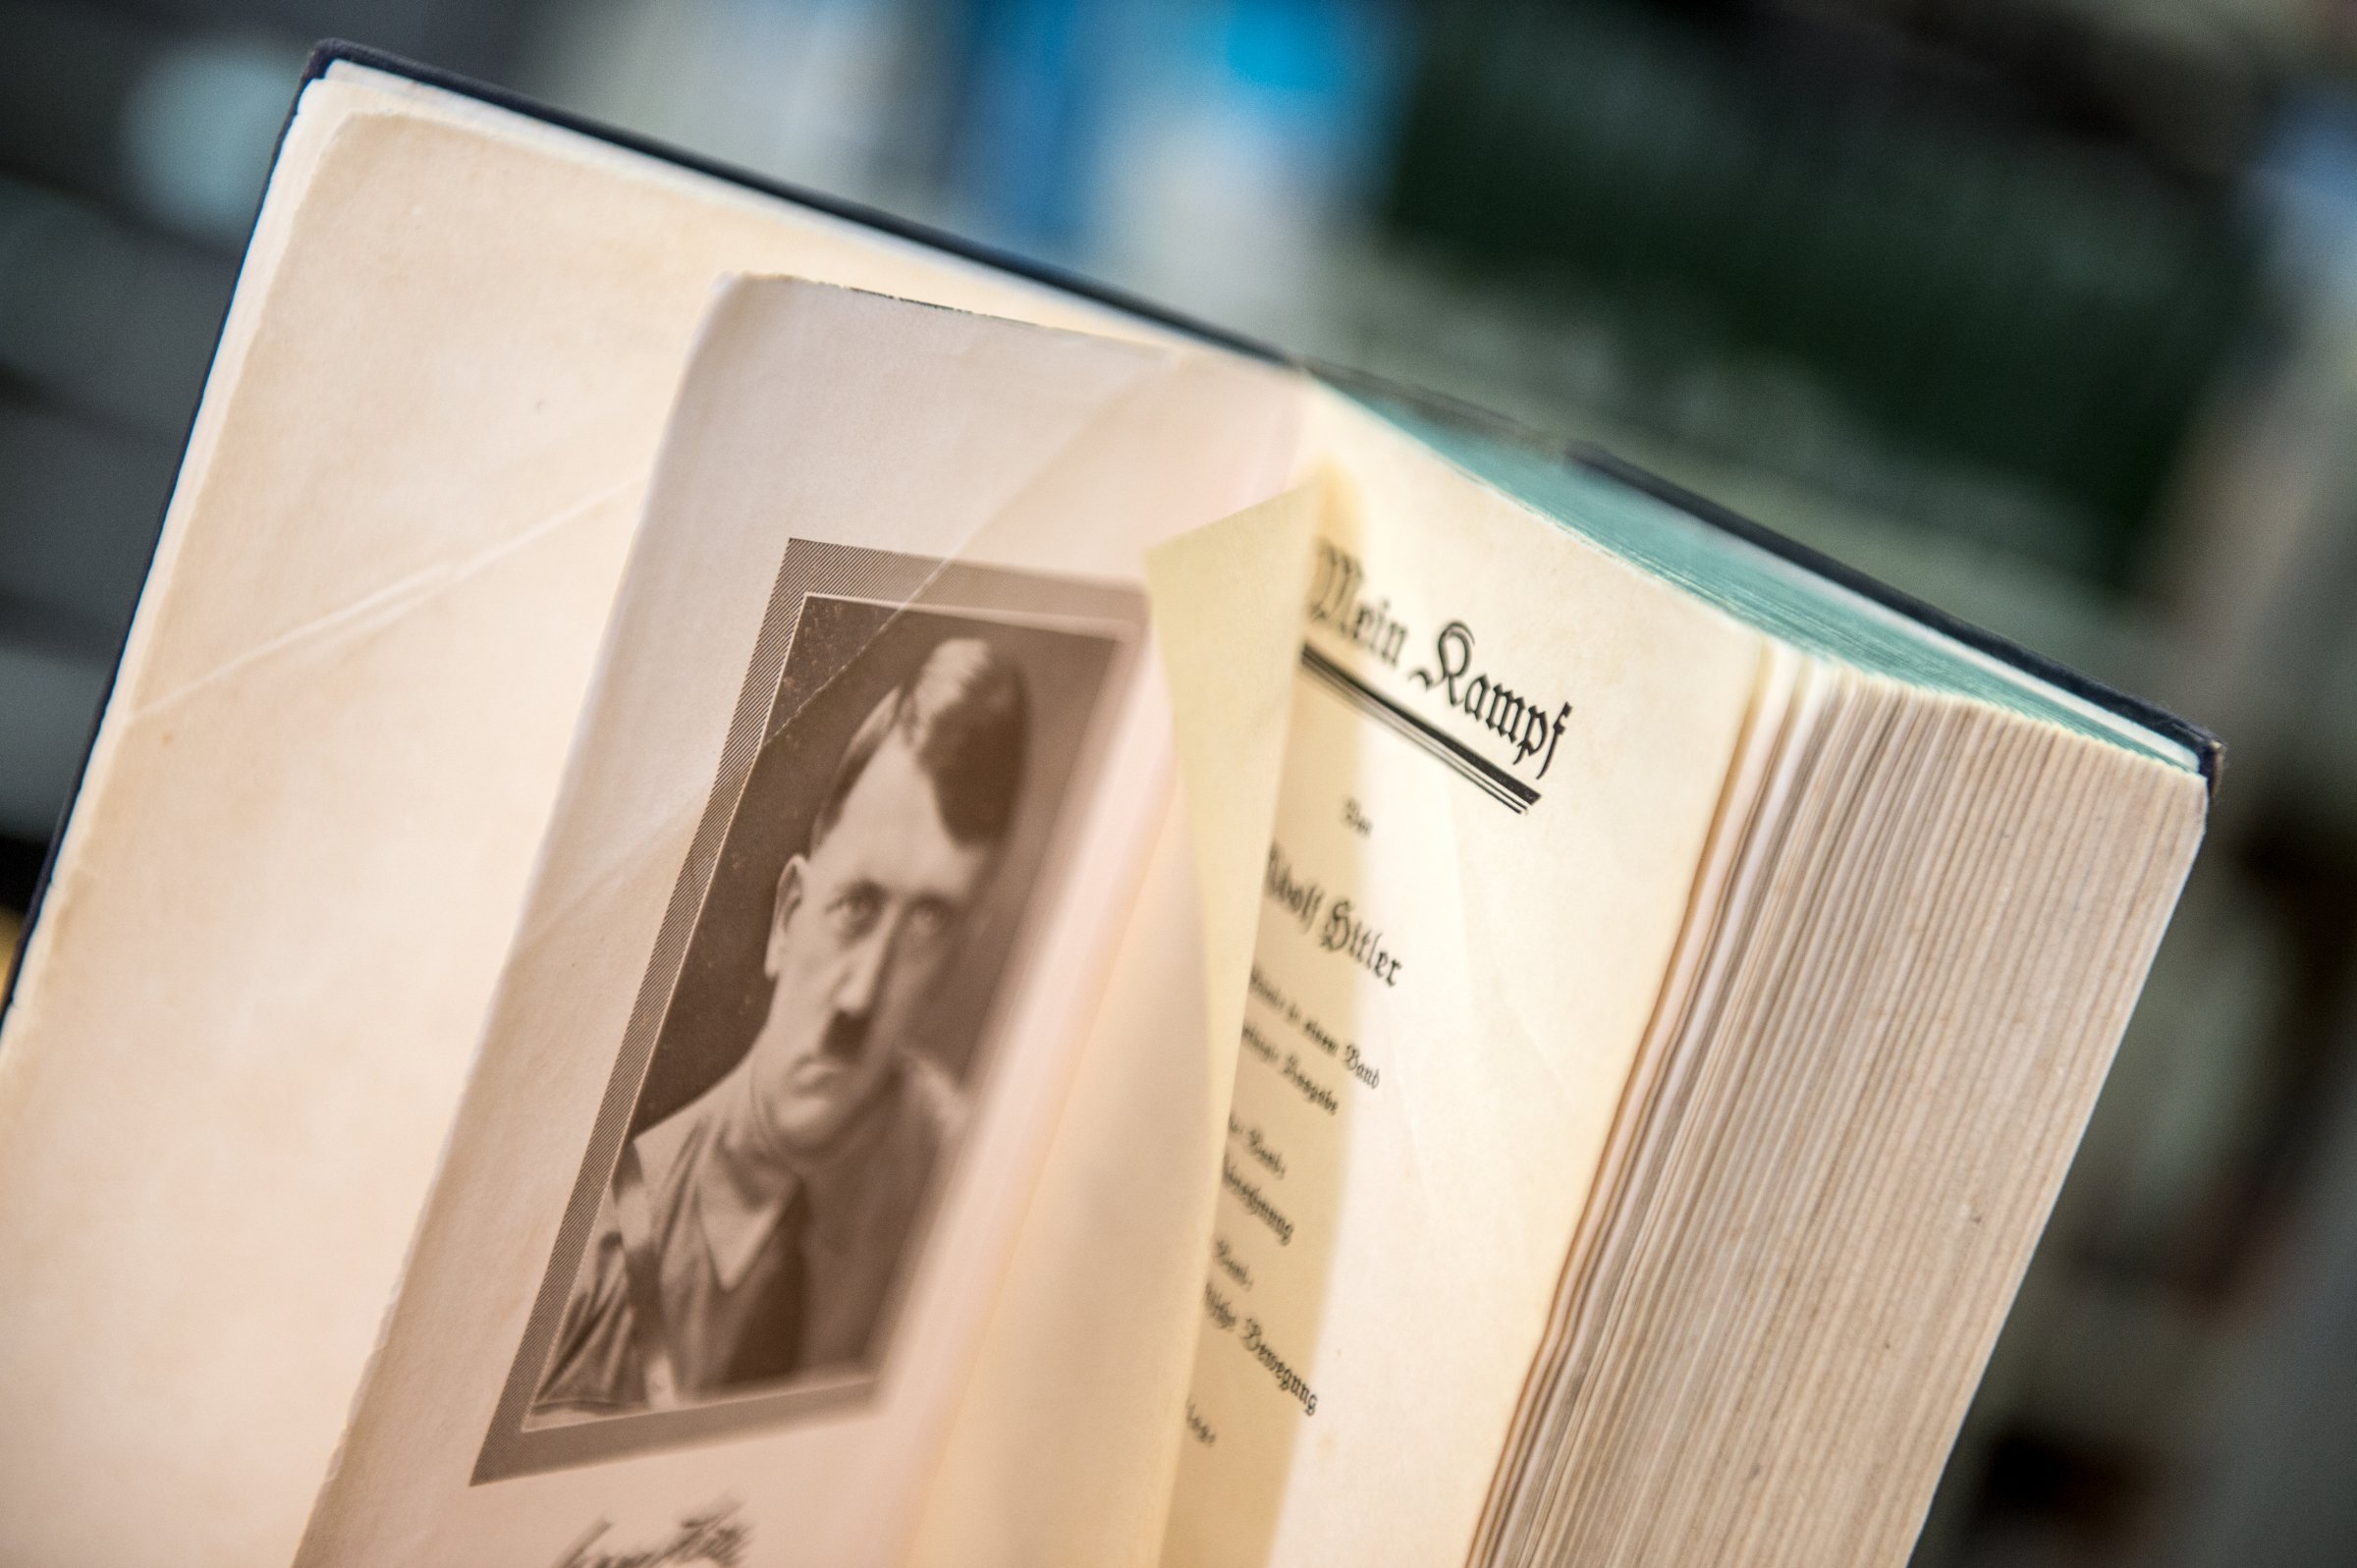 An opened page of the original edition of Hitler's inflammatory pamphlet 'Mein Kampf' shows a portrait of national socialist dictator Adolf Hitler, in a bookshop in Frankfurt, Germany on Jan.7, 2016.